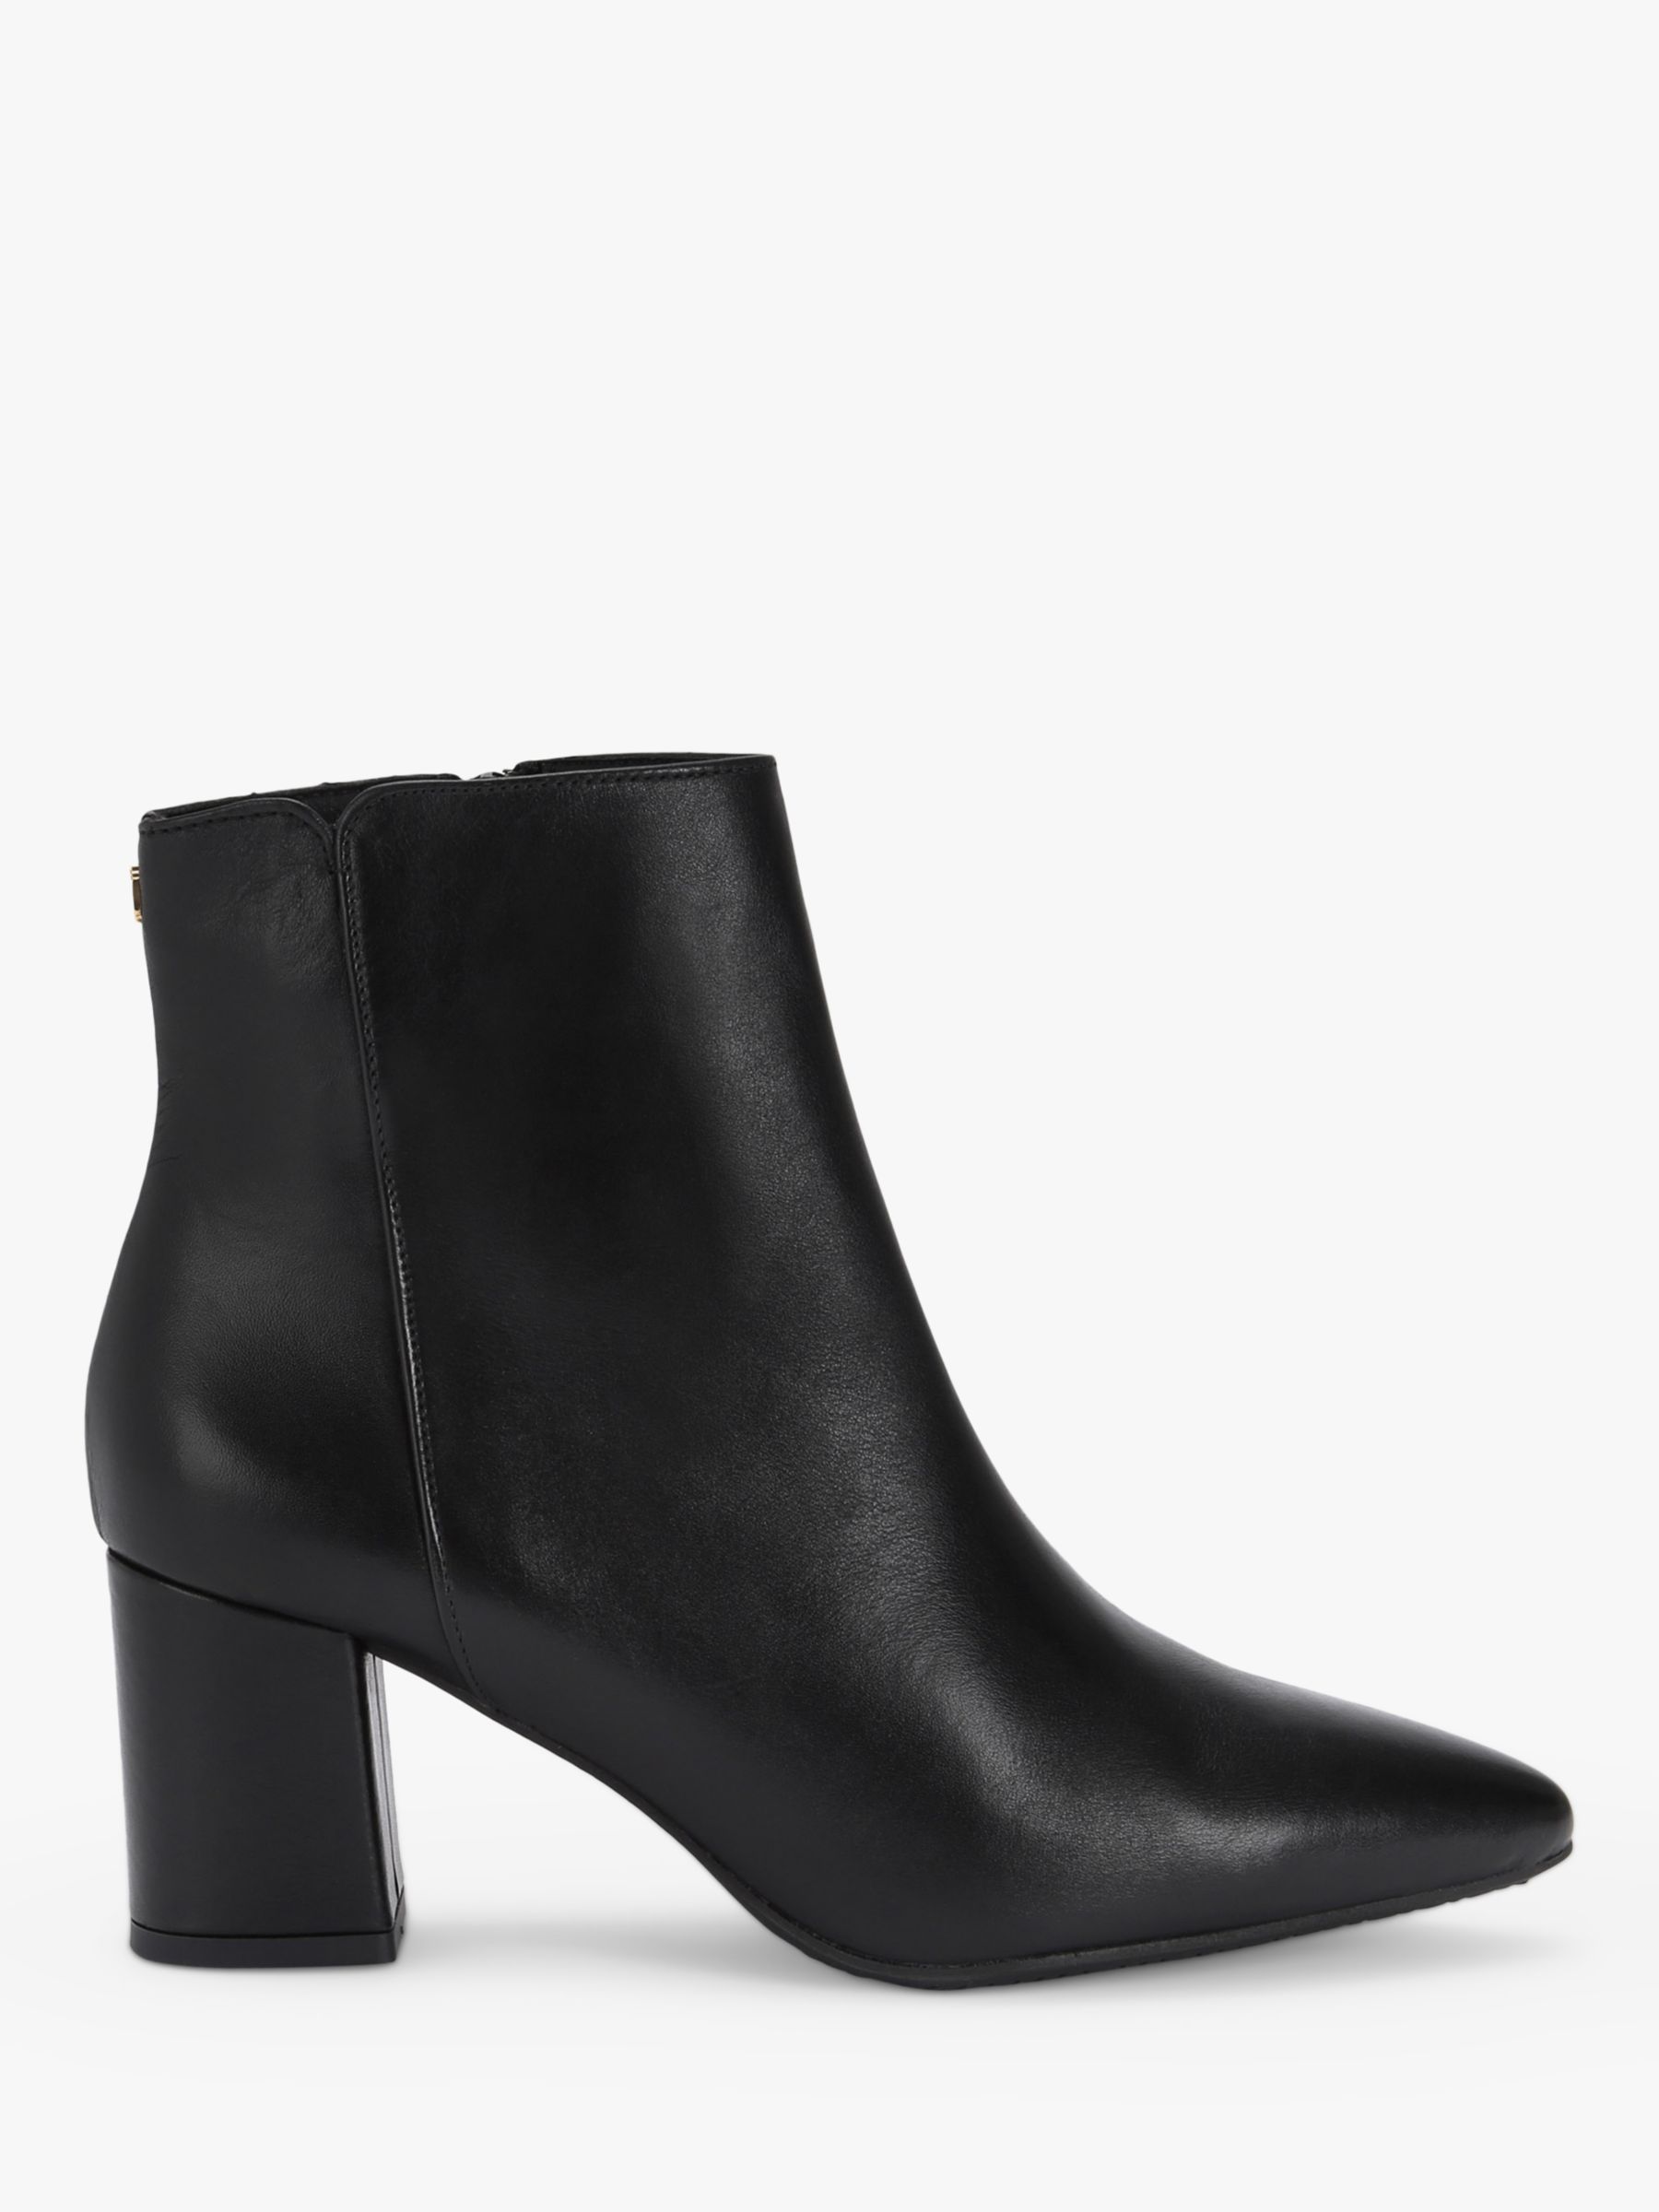 Carvela Melody Leather Ankle Boots, Black at John Lewis & Partners